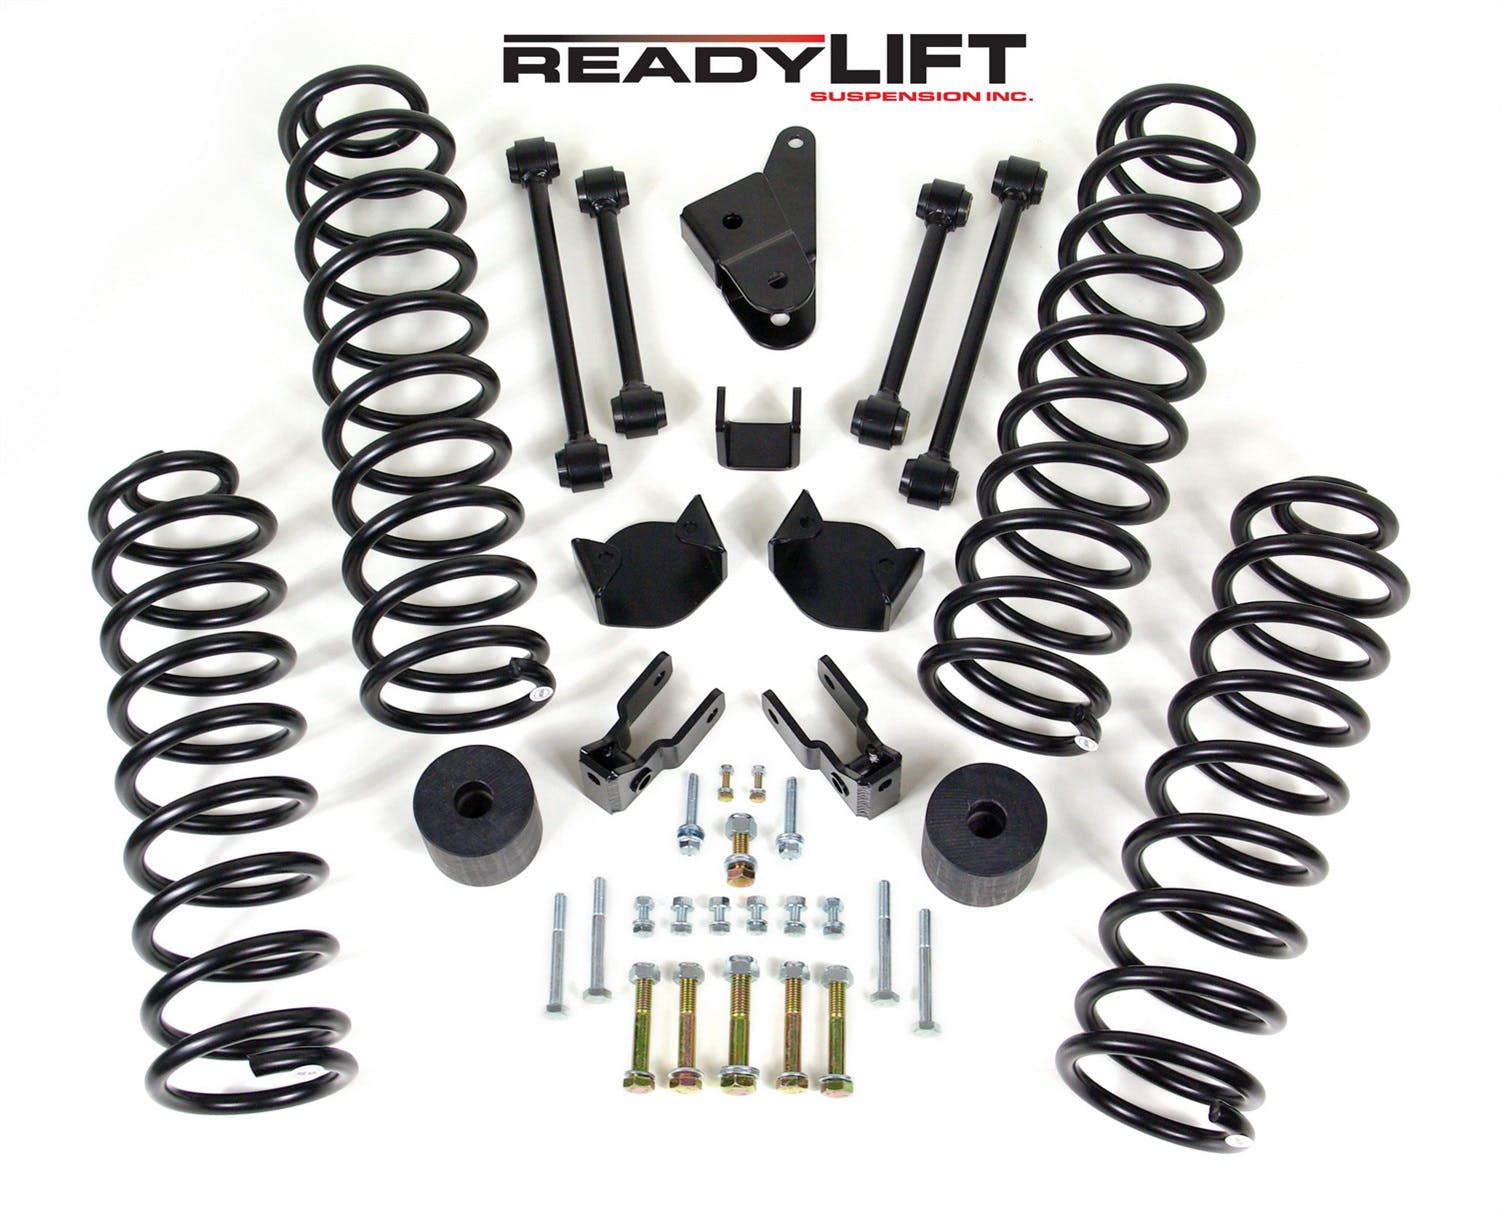 ReadyLIFT 69-6400 4" SST Coil Spring Lift Kit without Shocks